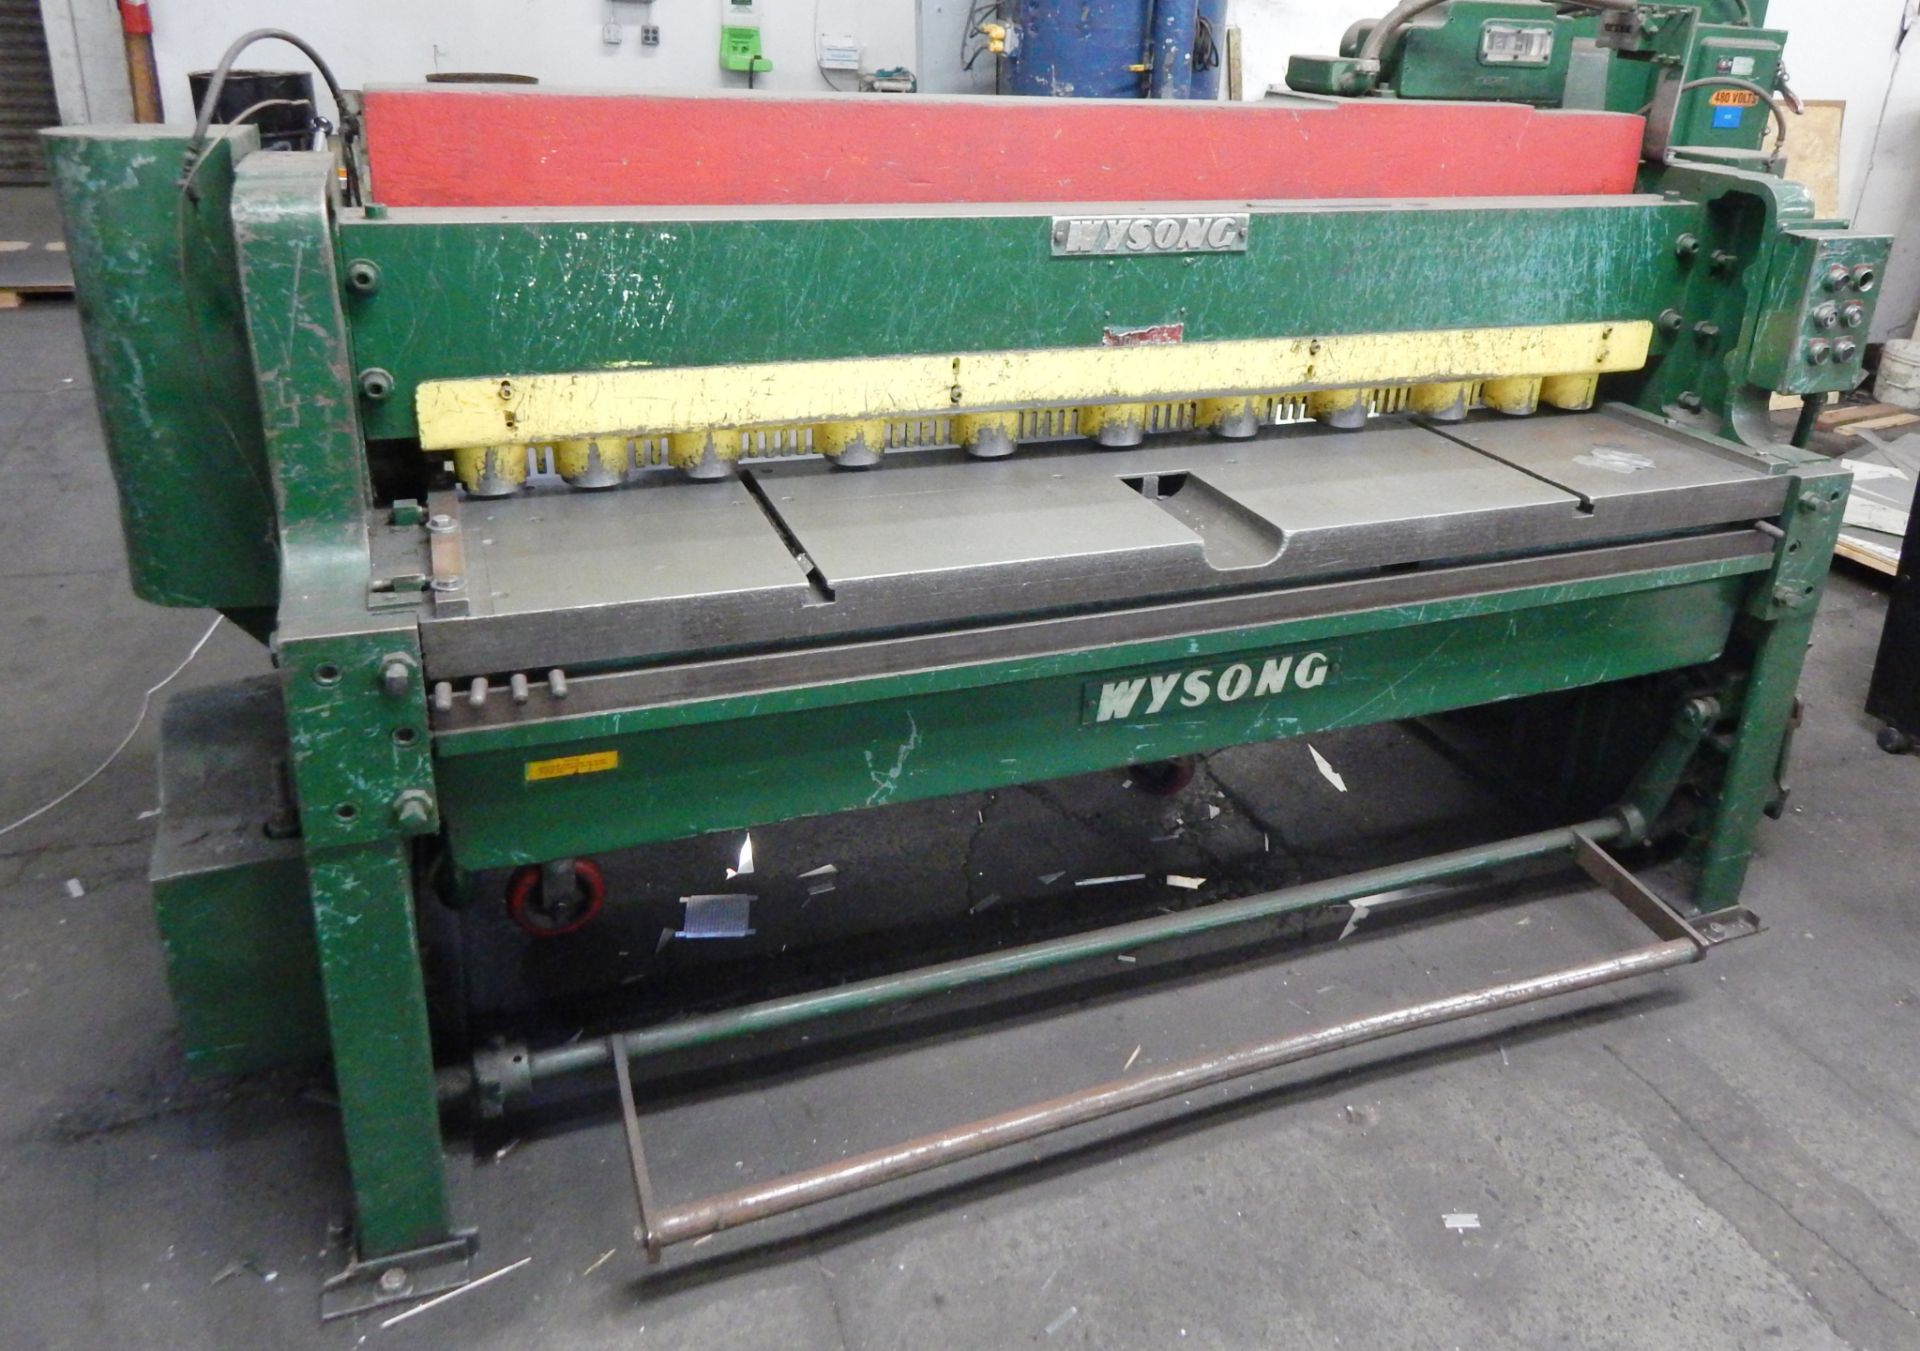 WYSONG 6' MECHANICAL POWER SHEAR, APPROXIMATELY 14ga), WITH HOLDDOWNS, FRONT OPERATED POWER BACK